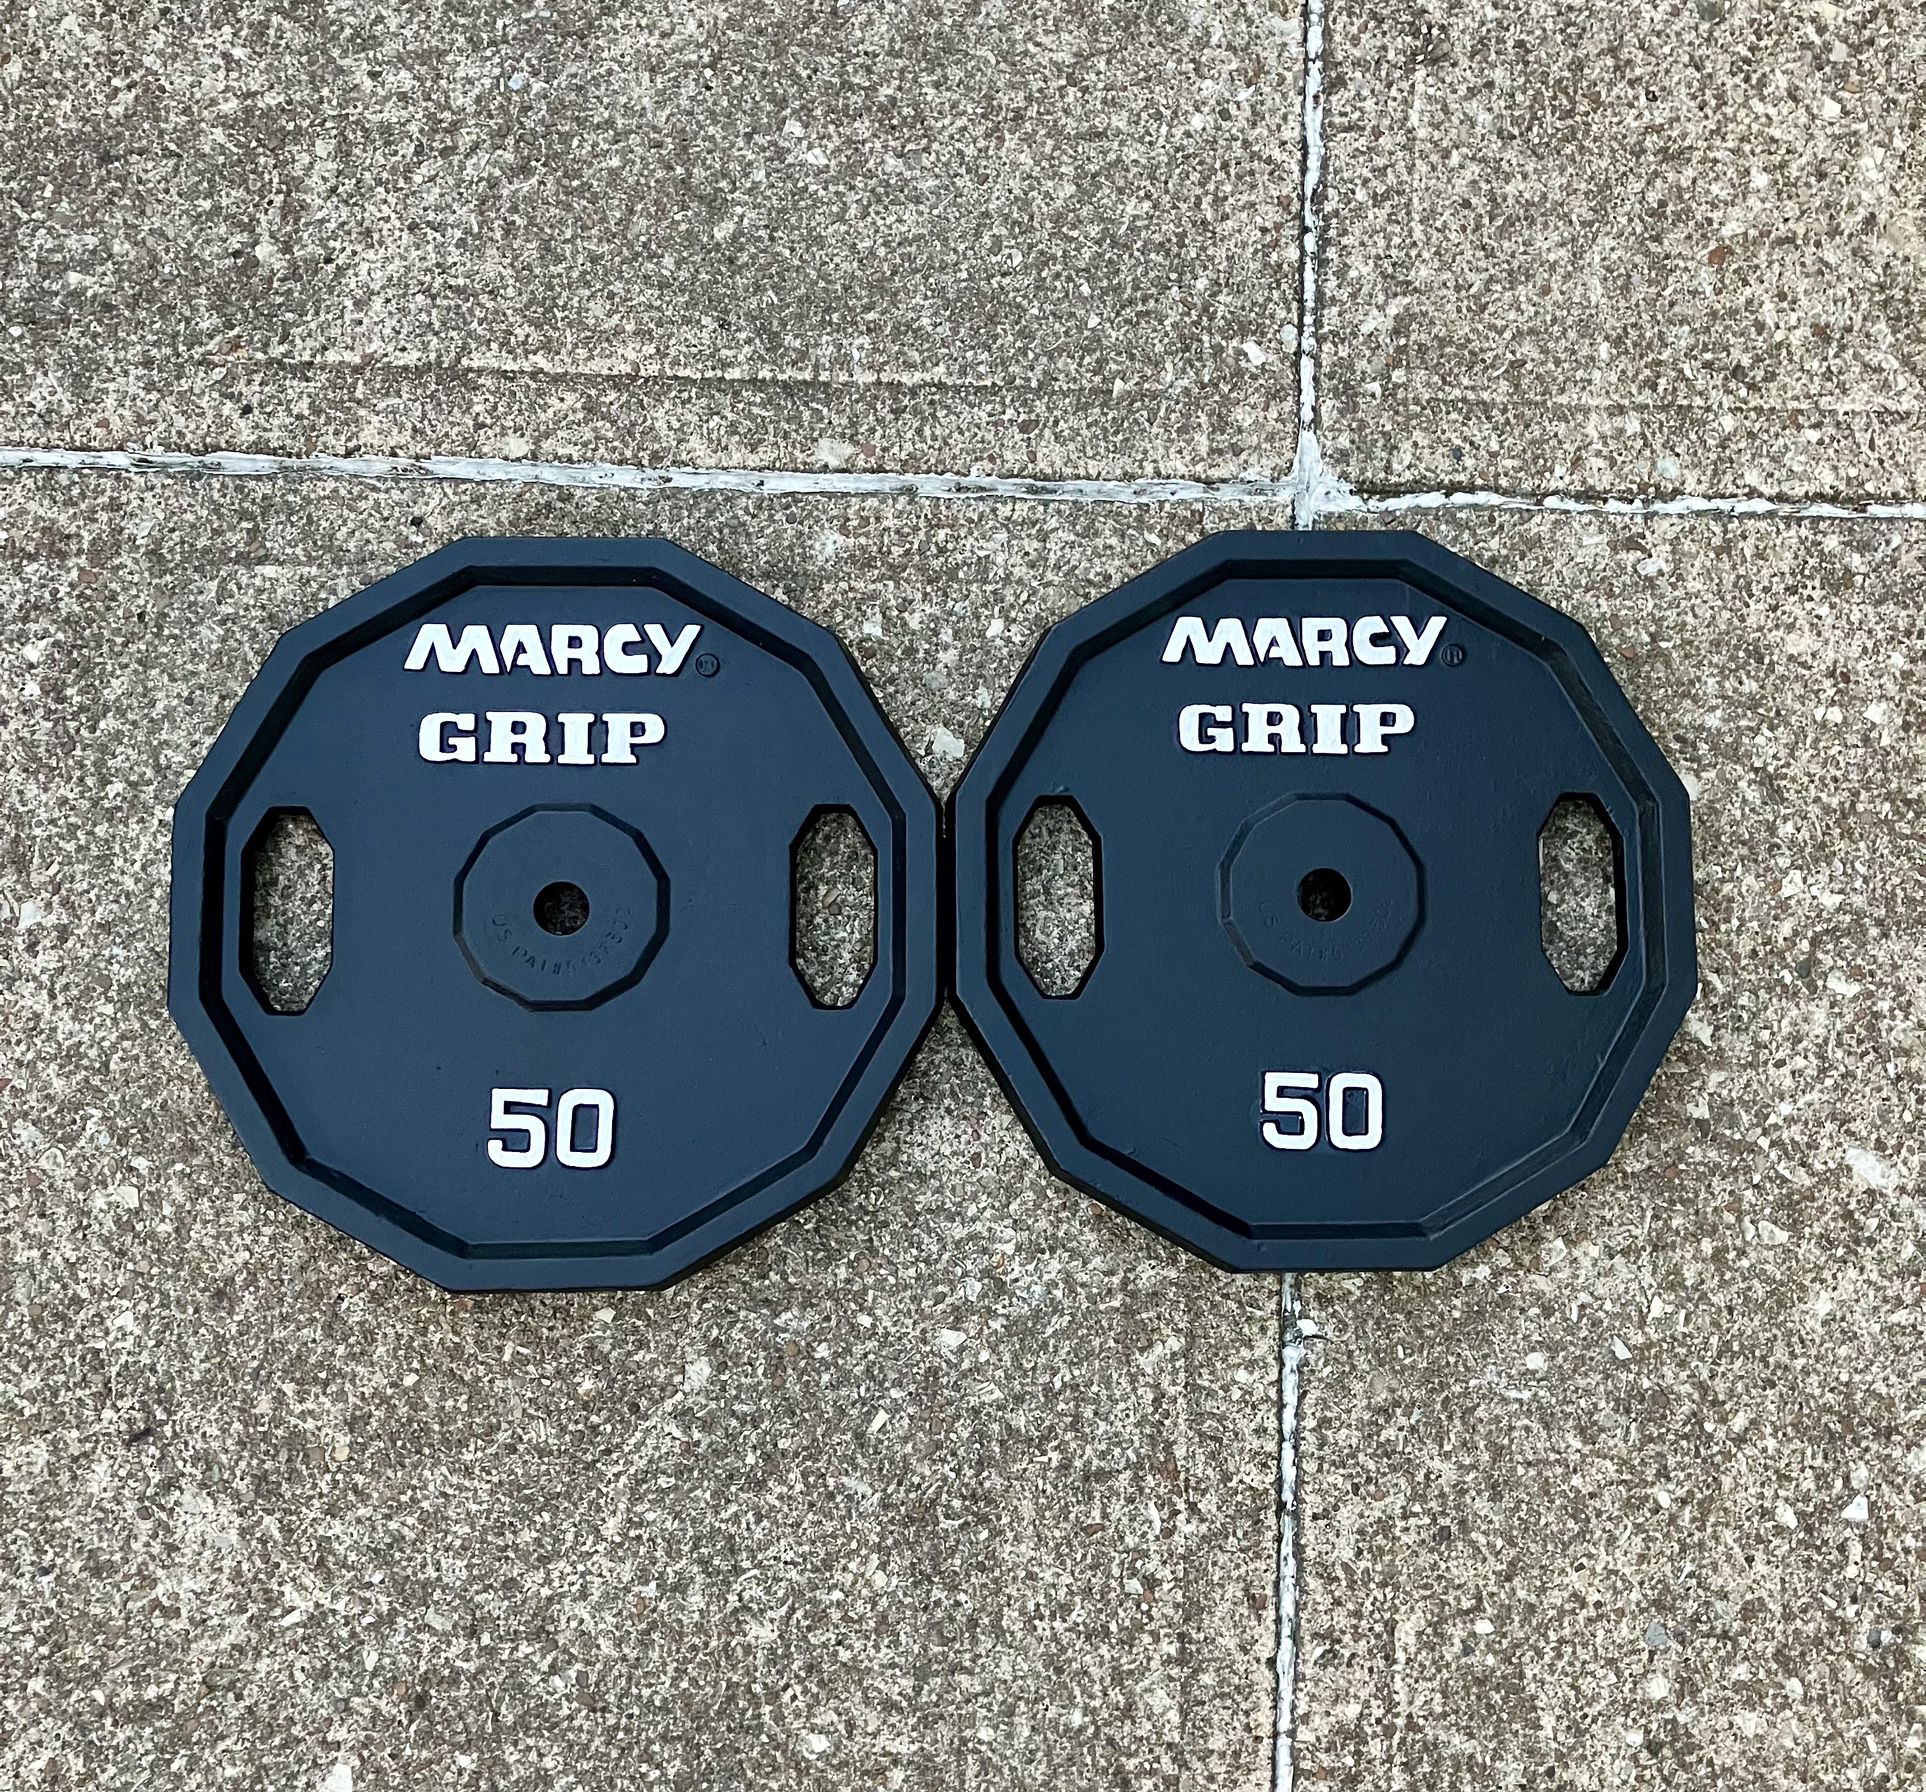 Marcy Grip Standard 50 lb 1" weight plate set 100 lbs tot 50lb 50lbs weights Cast Iron plates brand style